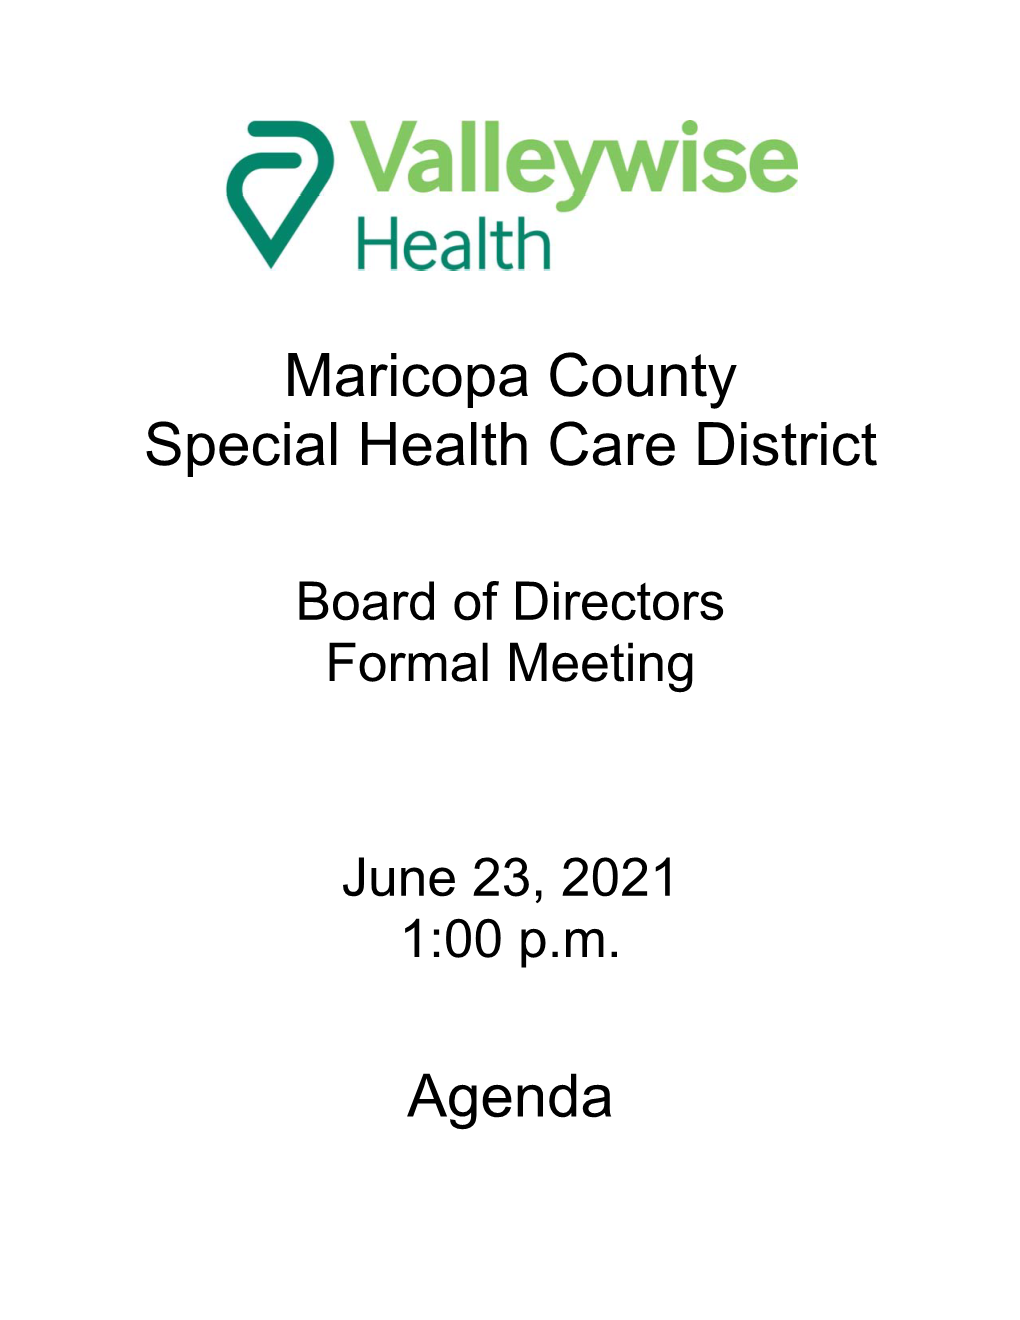 Maricopa County Special Health Care District